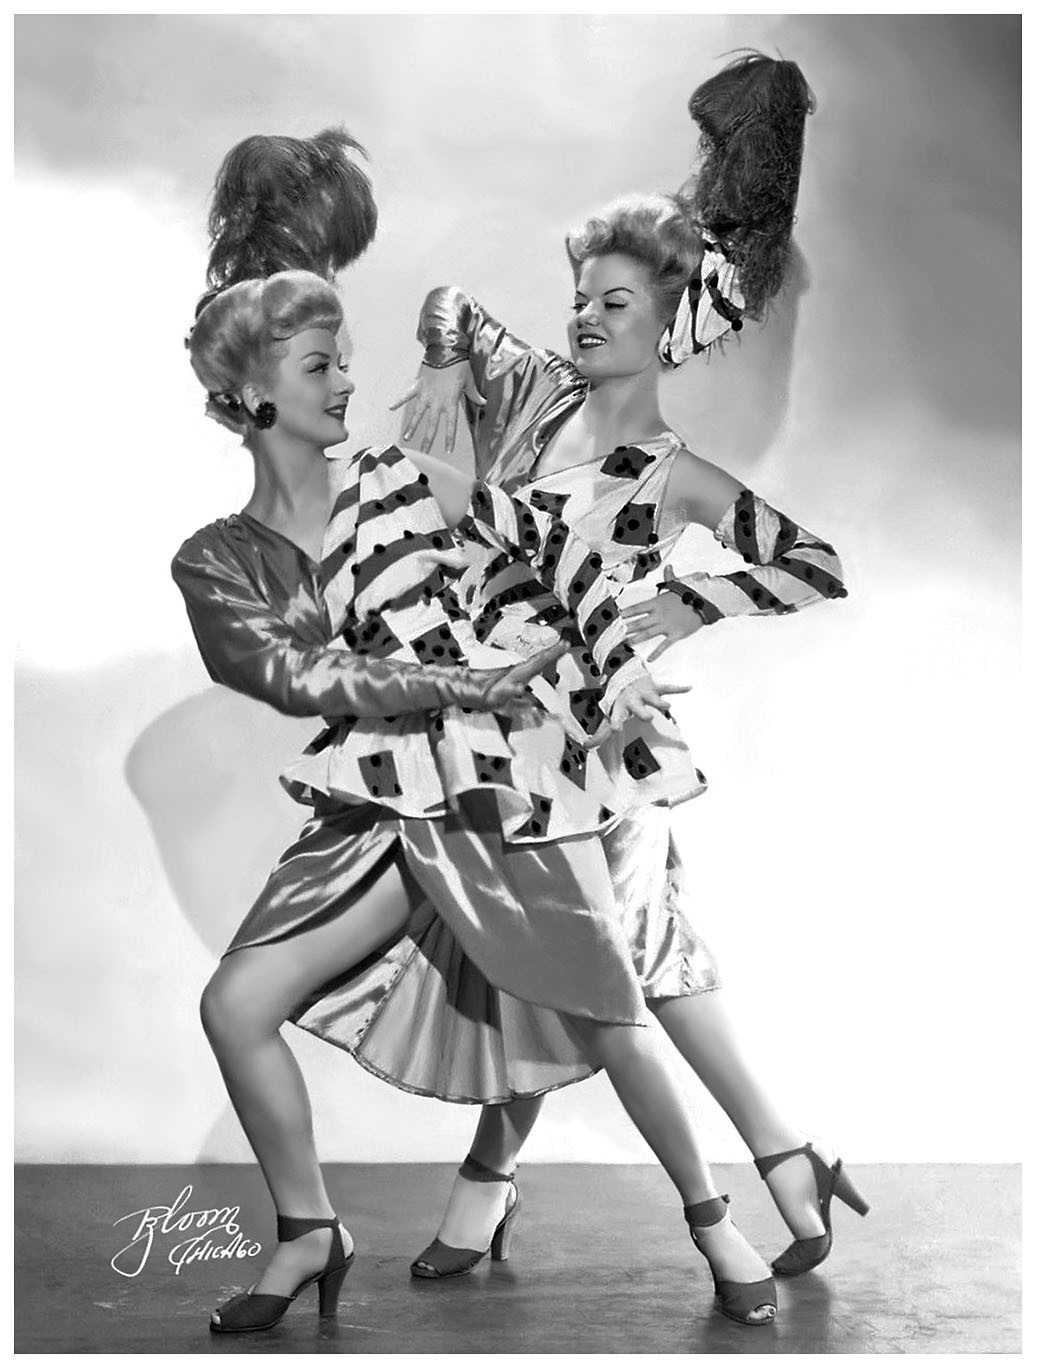 Pat Blotteaux (Left) and Betty Jaymes (Right) pose together in a promo photo  advertising